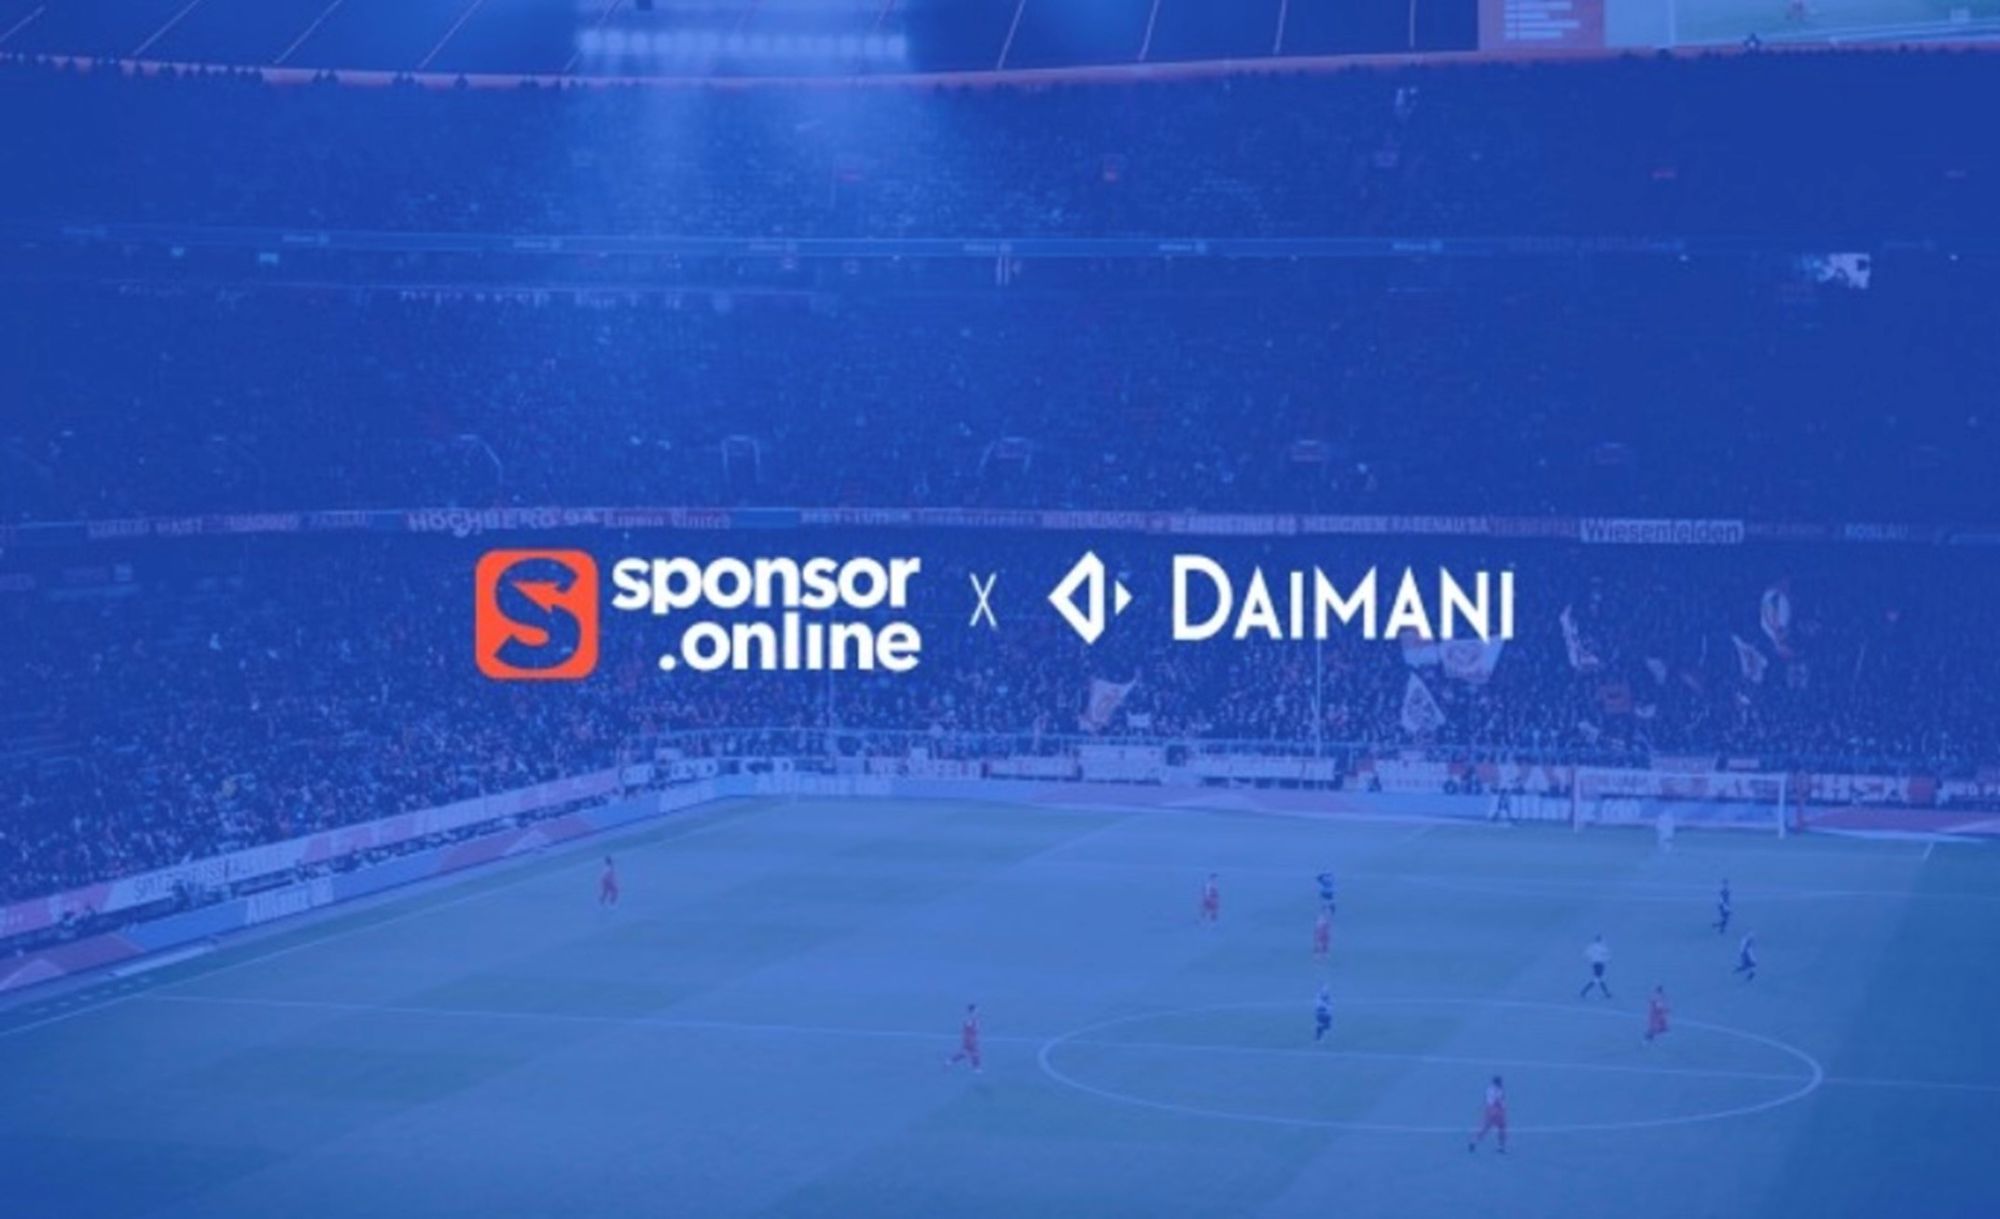 DAIMANI partners with Sponsor.Online